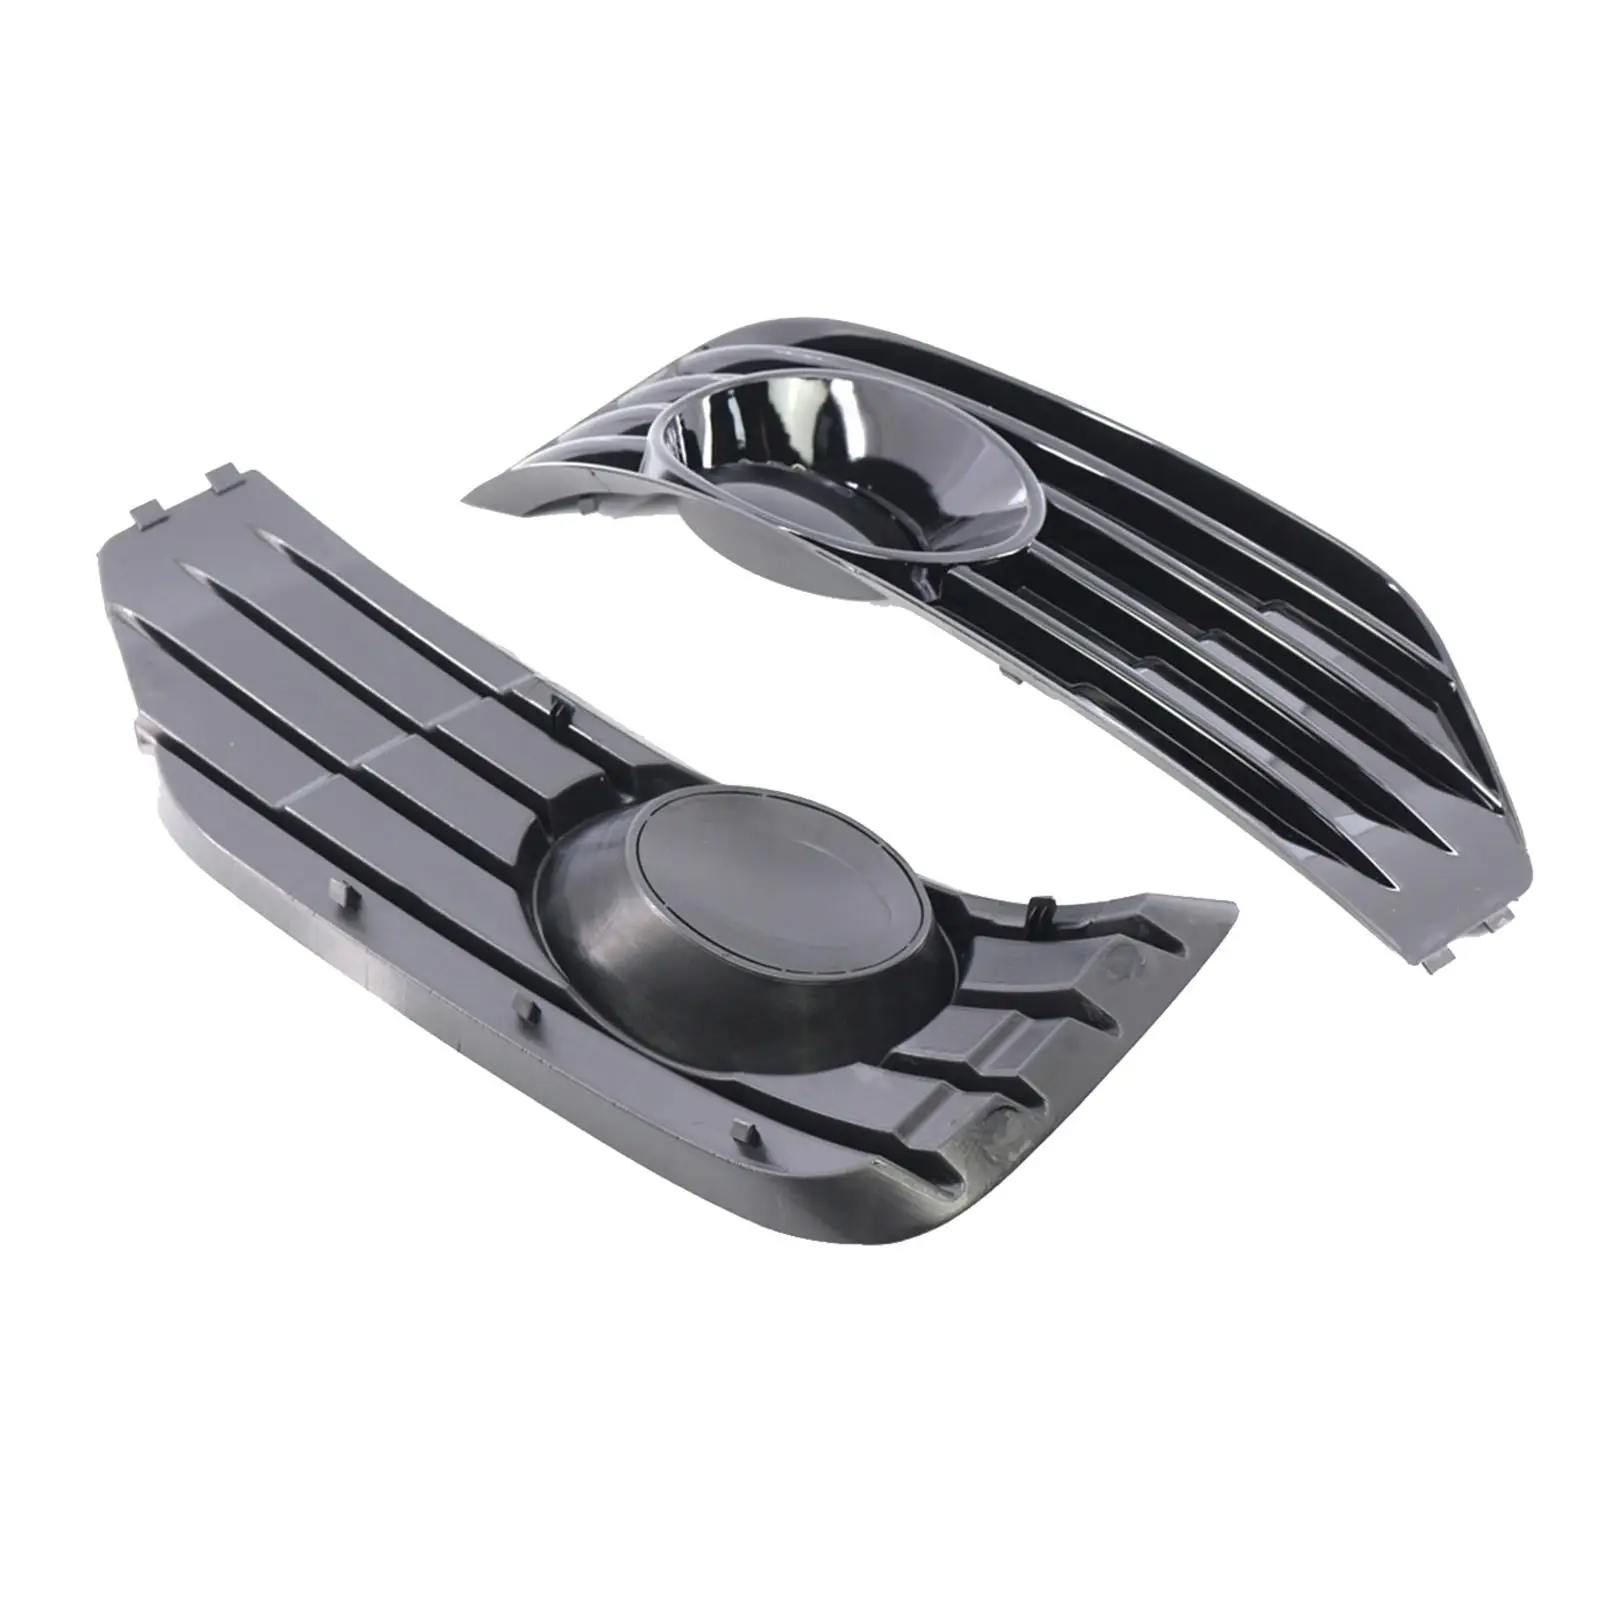 Gloss Black Fog Light Inserts Covers Direct Replaces Repair Parts Foglight